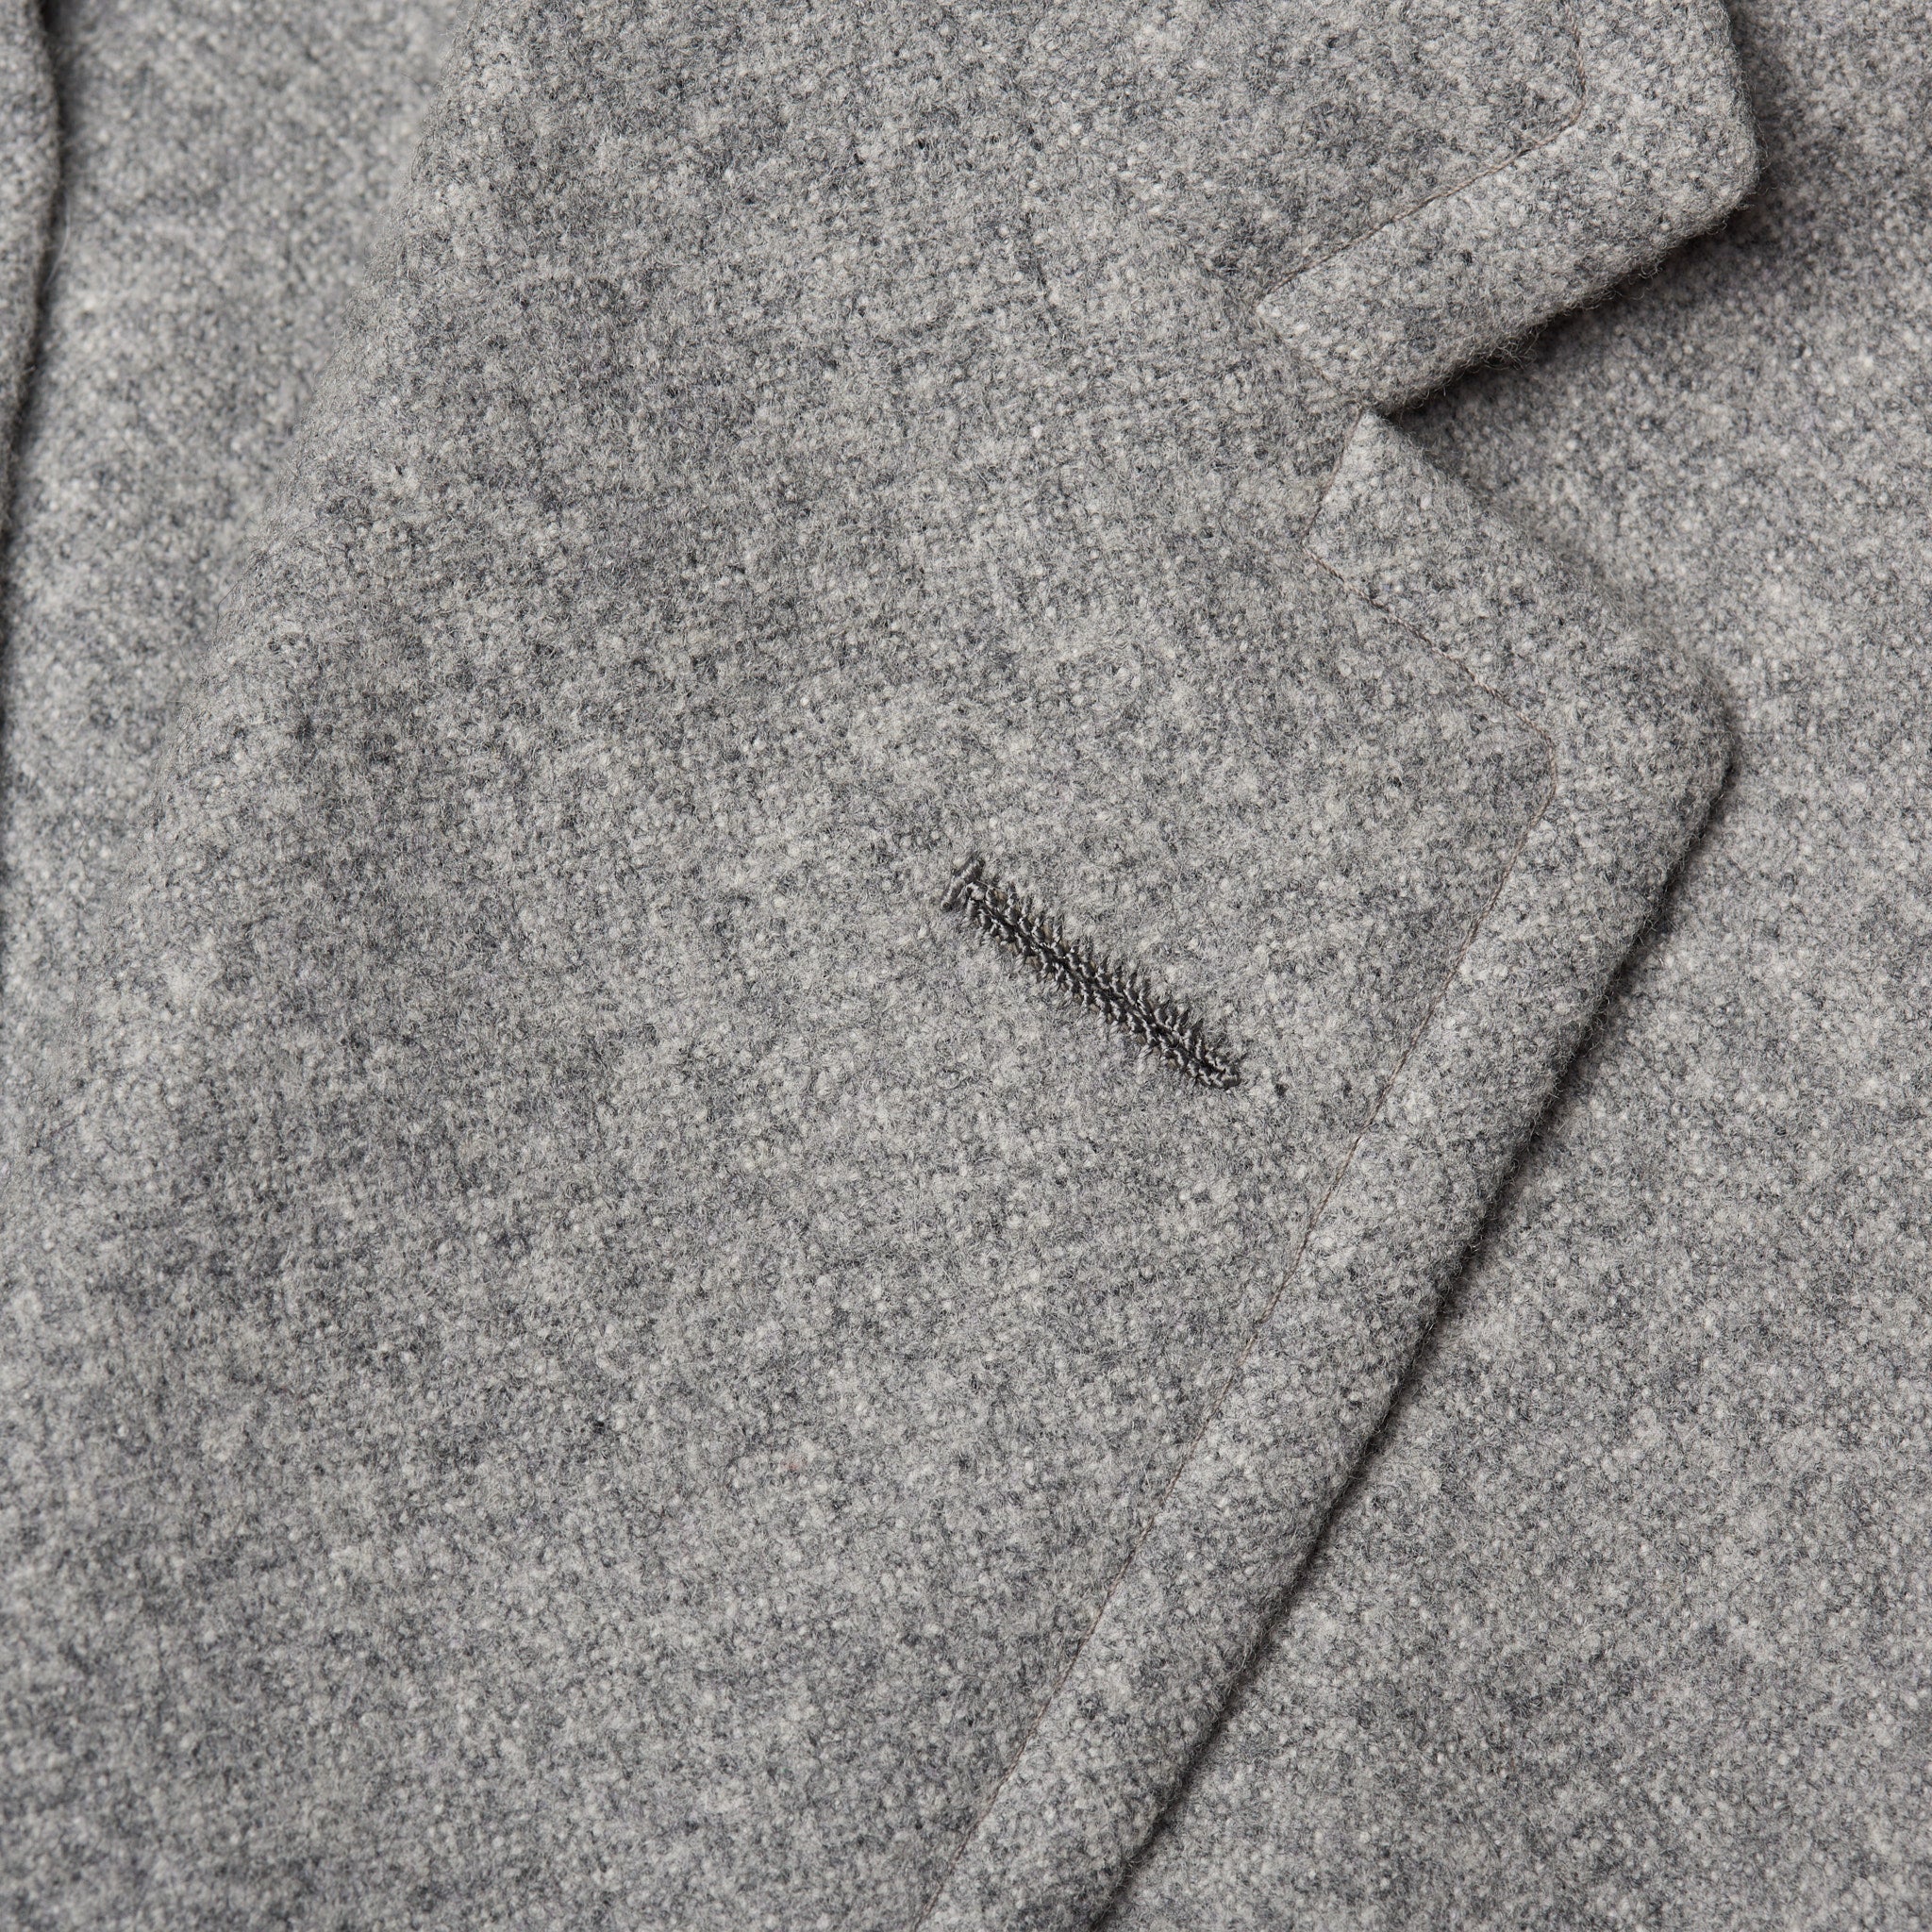 D'AVENZA Roma Handmade Gray Wool-Cashmere Unlined Flannel Suit 50 NEW US 40 D'AVENZA